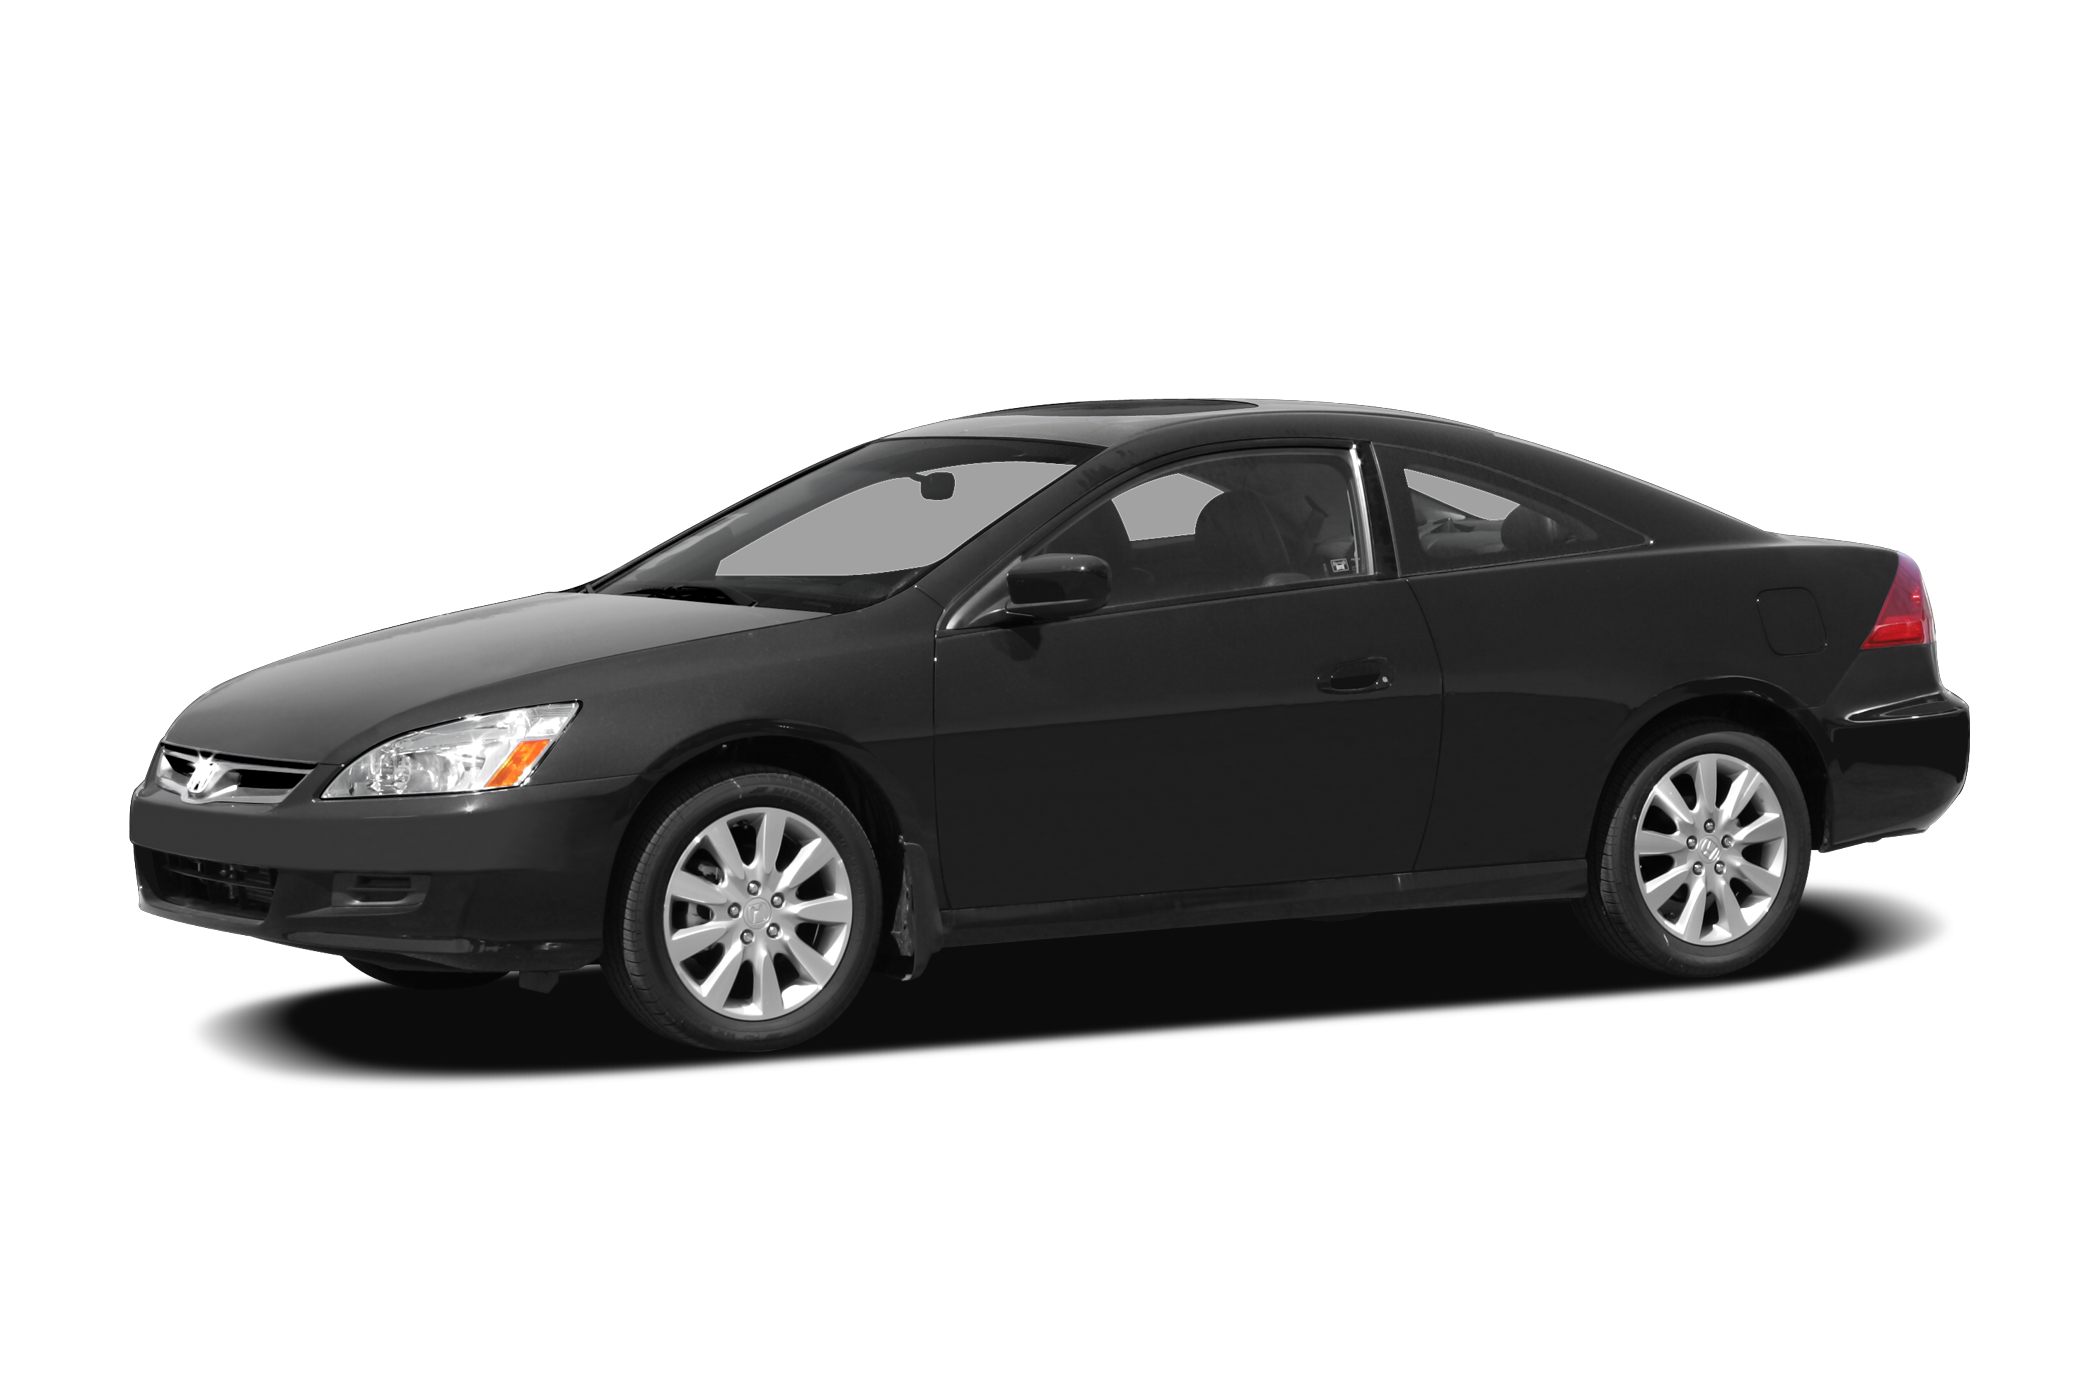 2007 Honda Accord 3 0 Ex W Auto 2dr Coupe Pictures